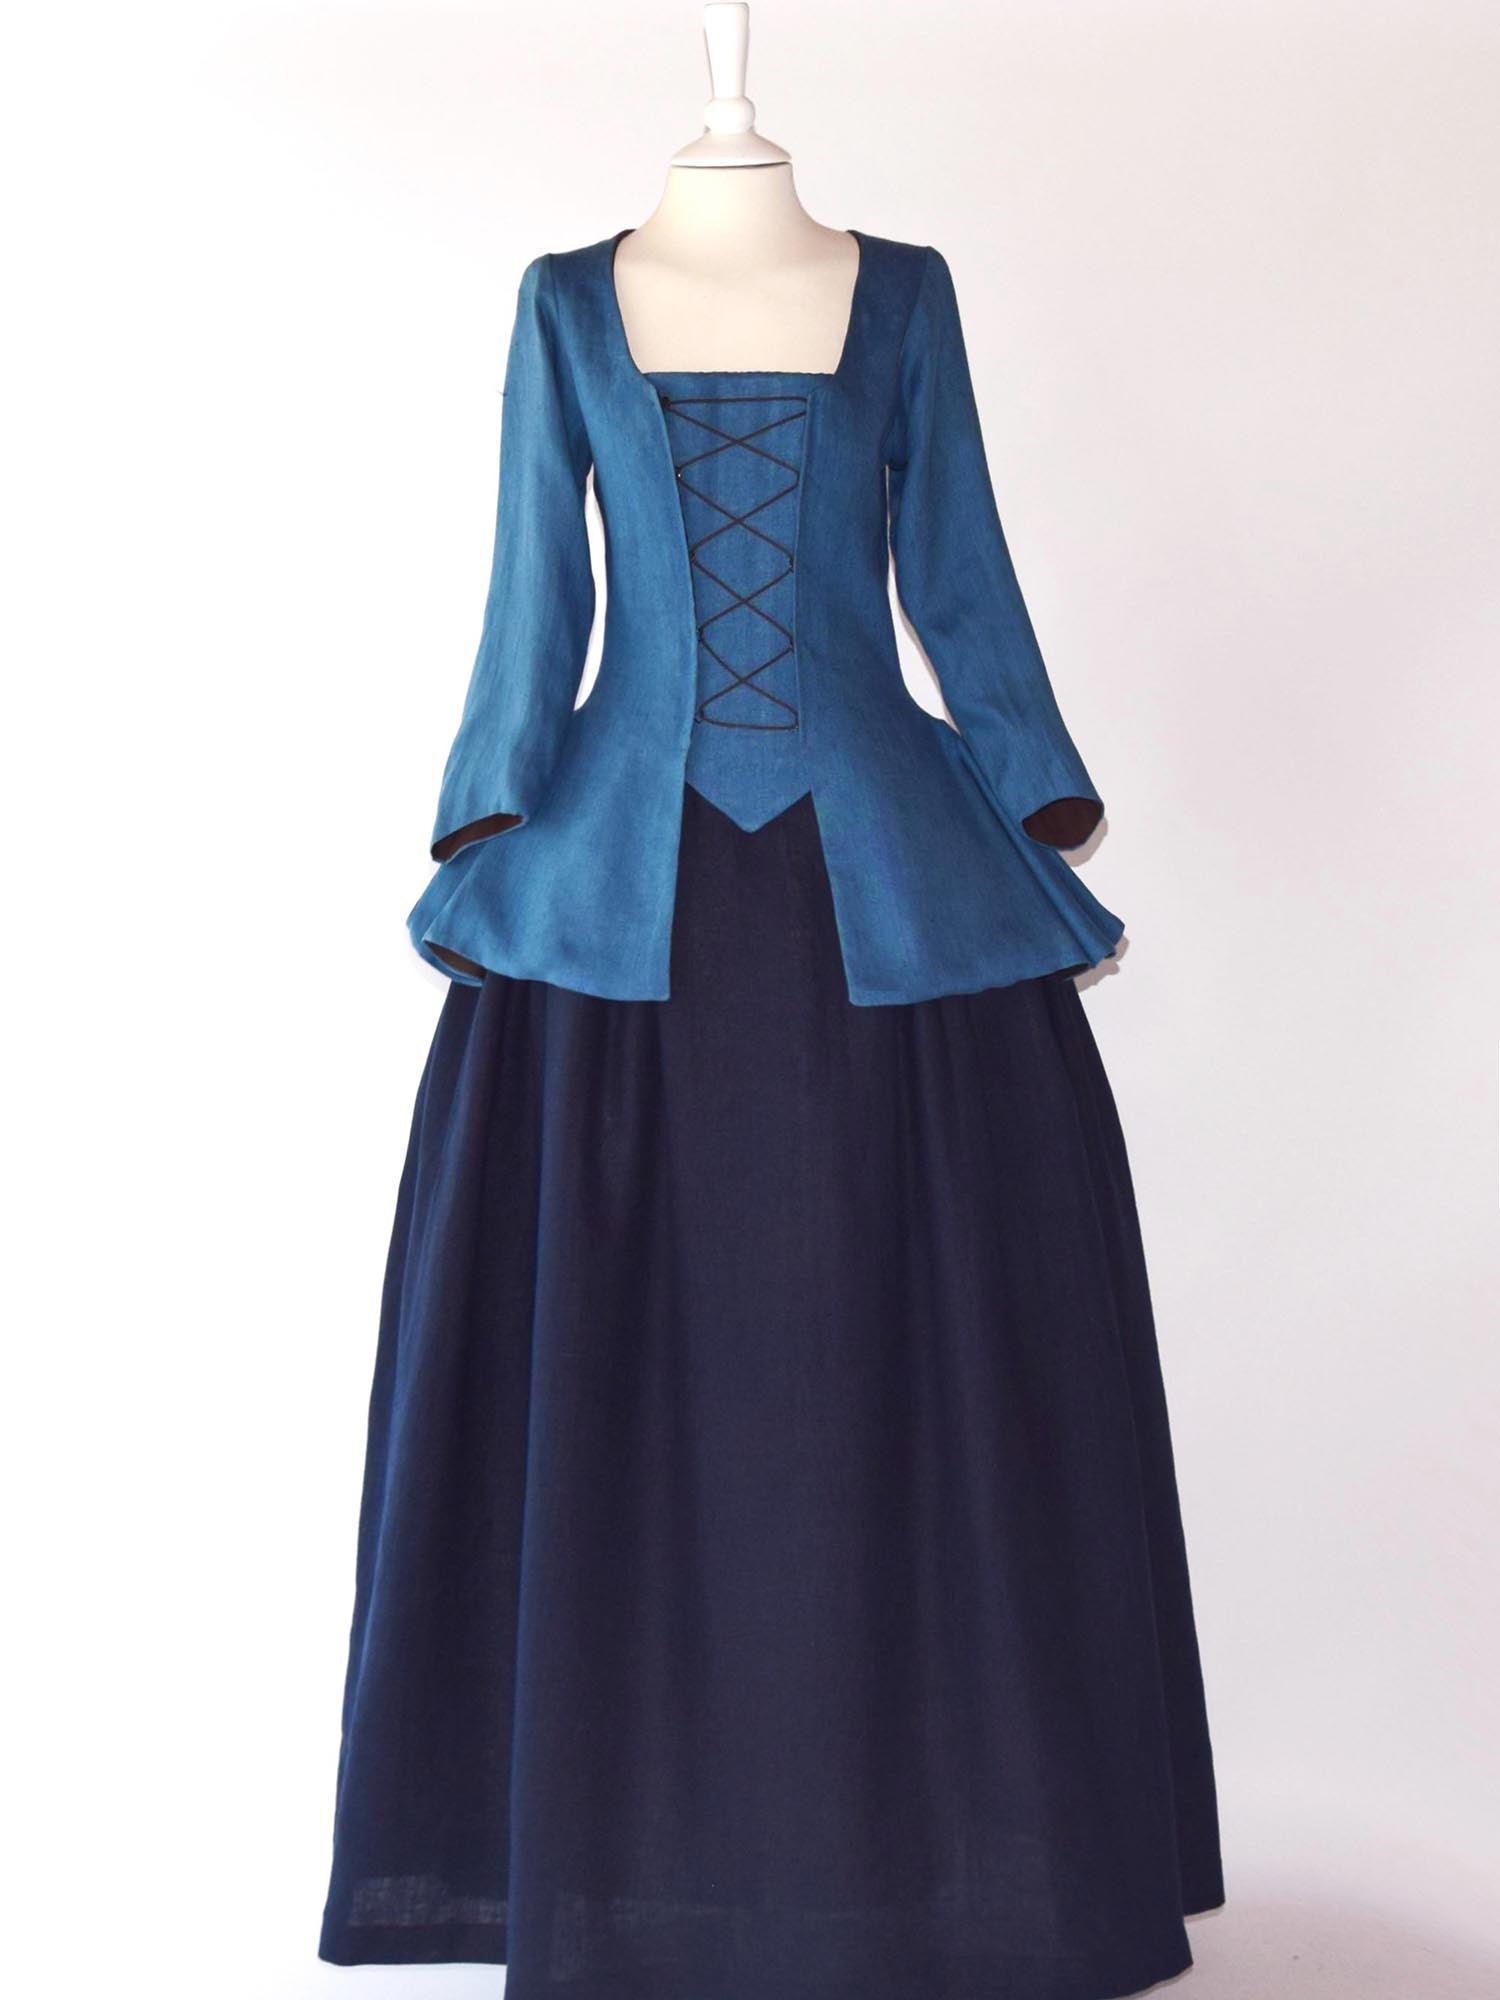 Colonial Costume in Steel and Night Blue Linen - Atelier Serraspina